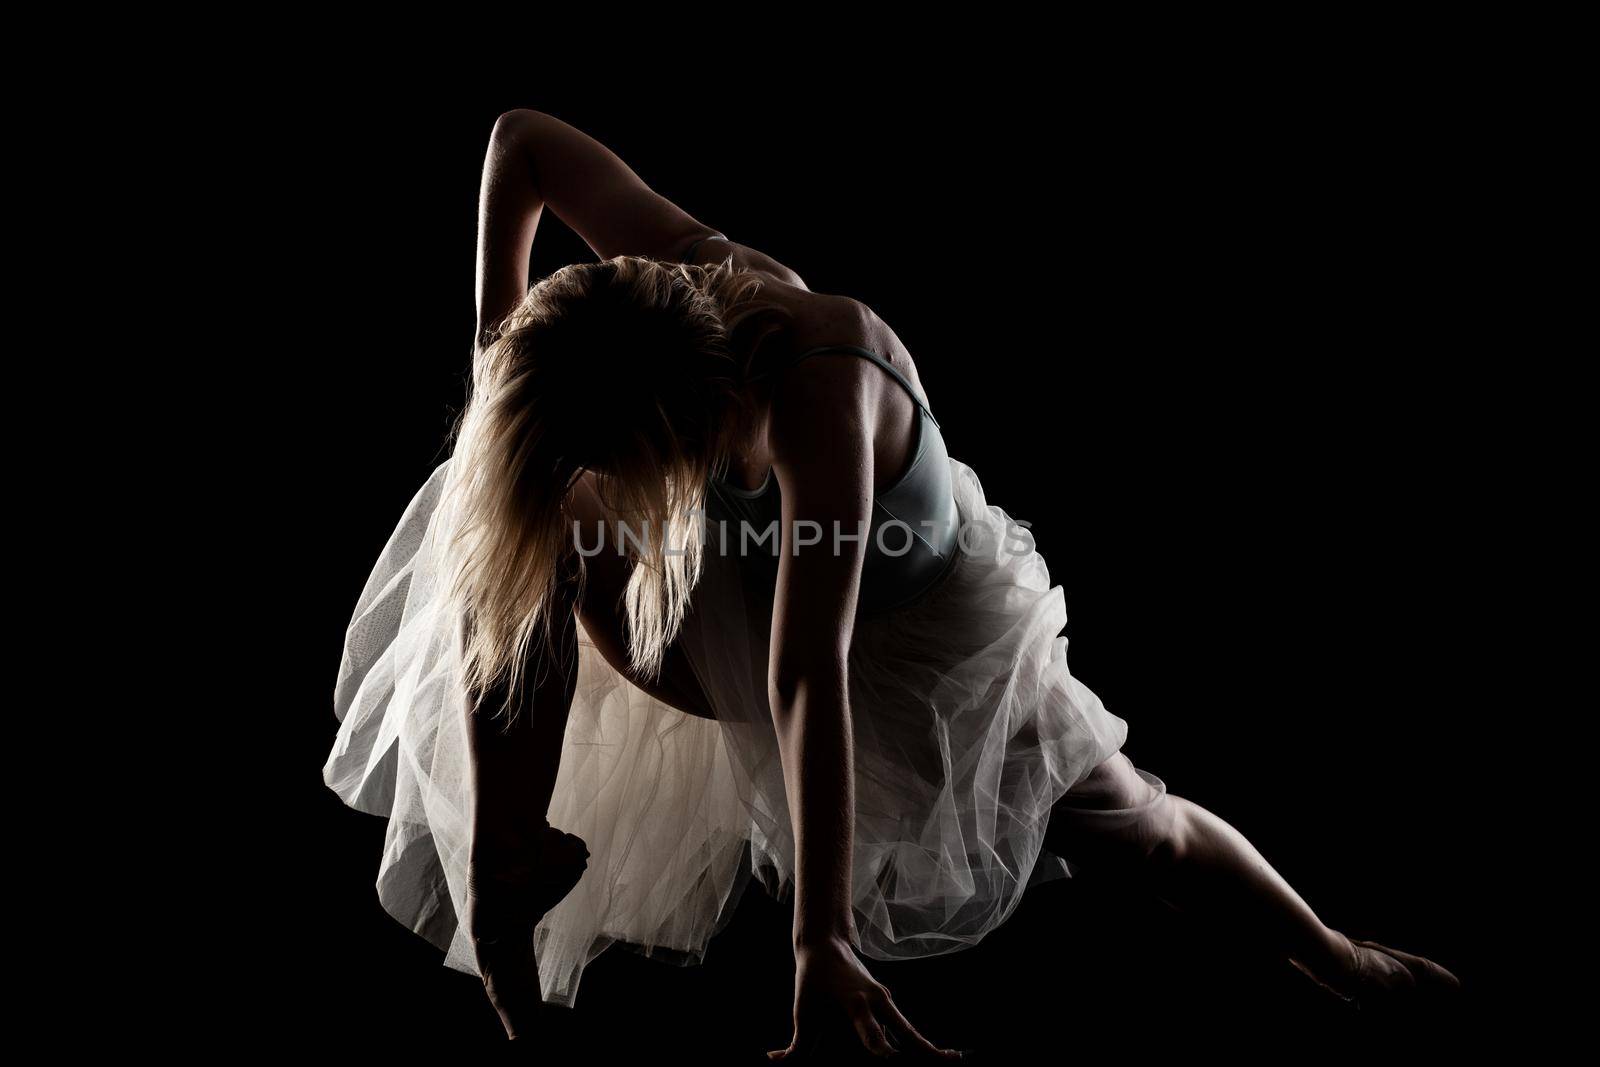 ballerina with a white dress and black top posing on black background. side lit silhouette. by kokimk